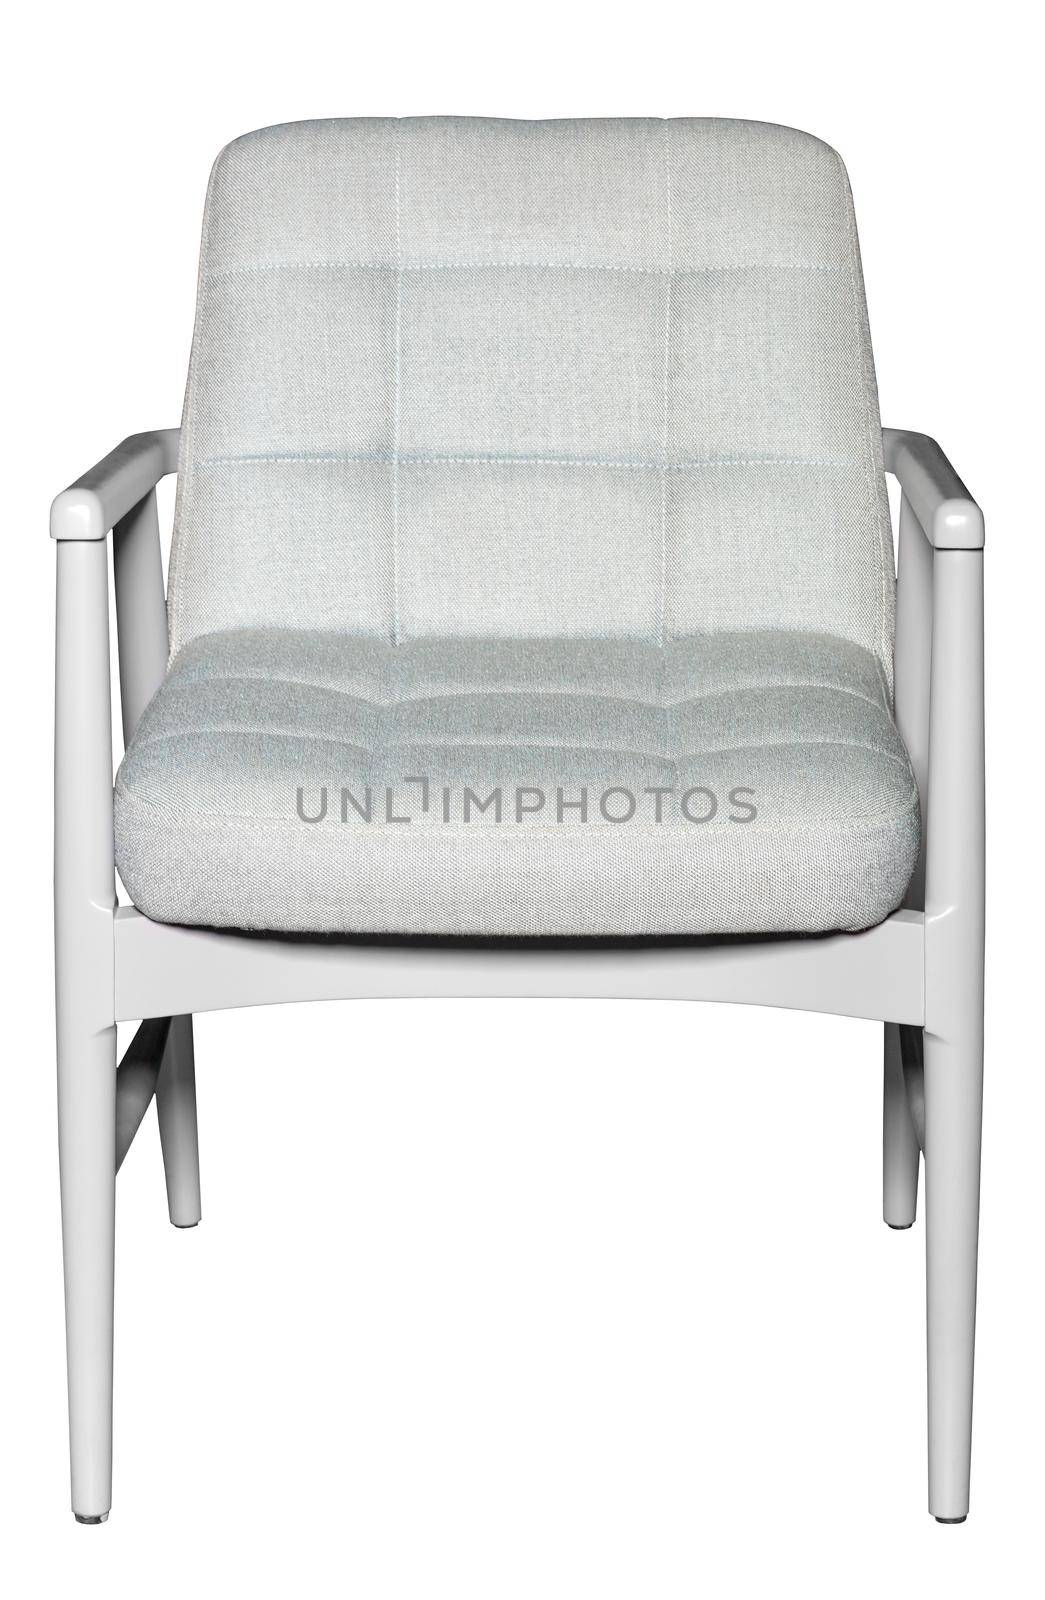 White comfortable wooden armchair with soft light fabric seat upholstery and supportive backrest with armrests in a minimalist style, photographed from the front, isolated on white background.